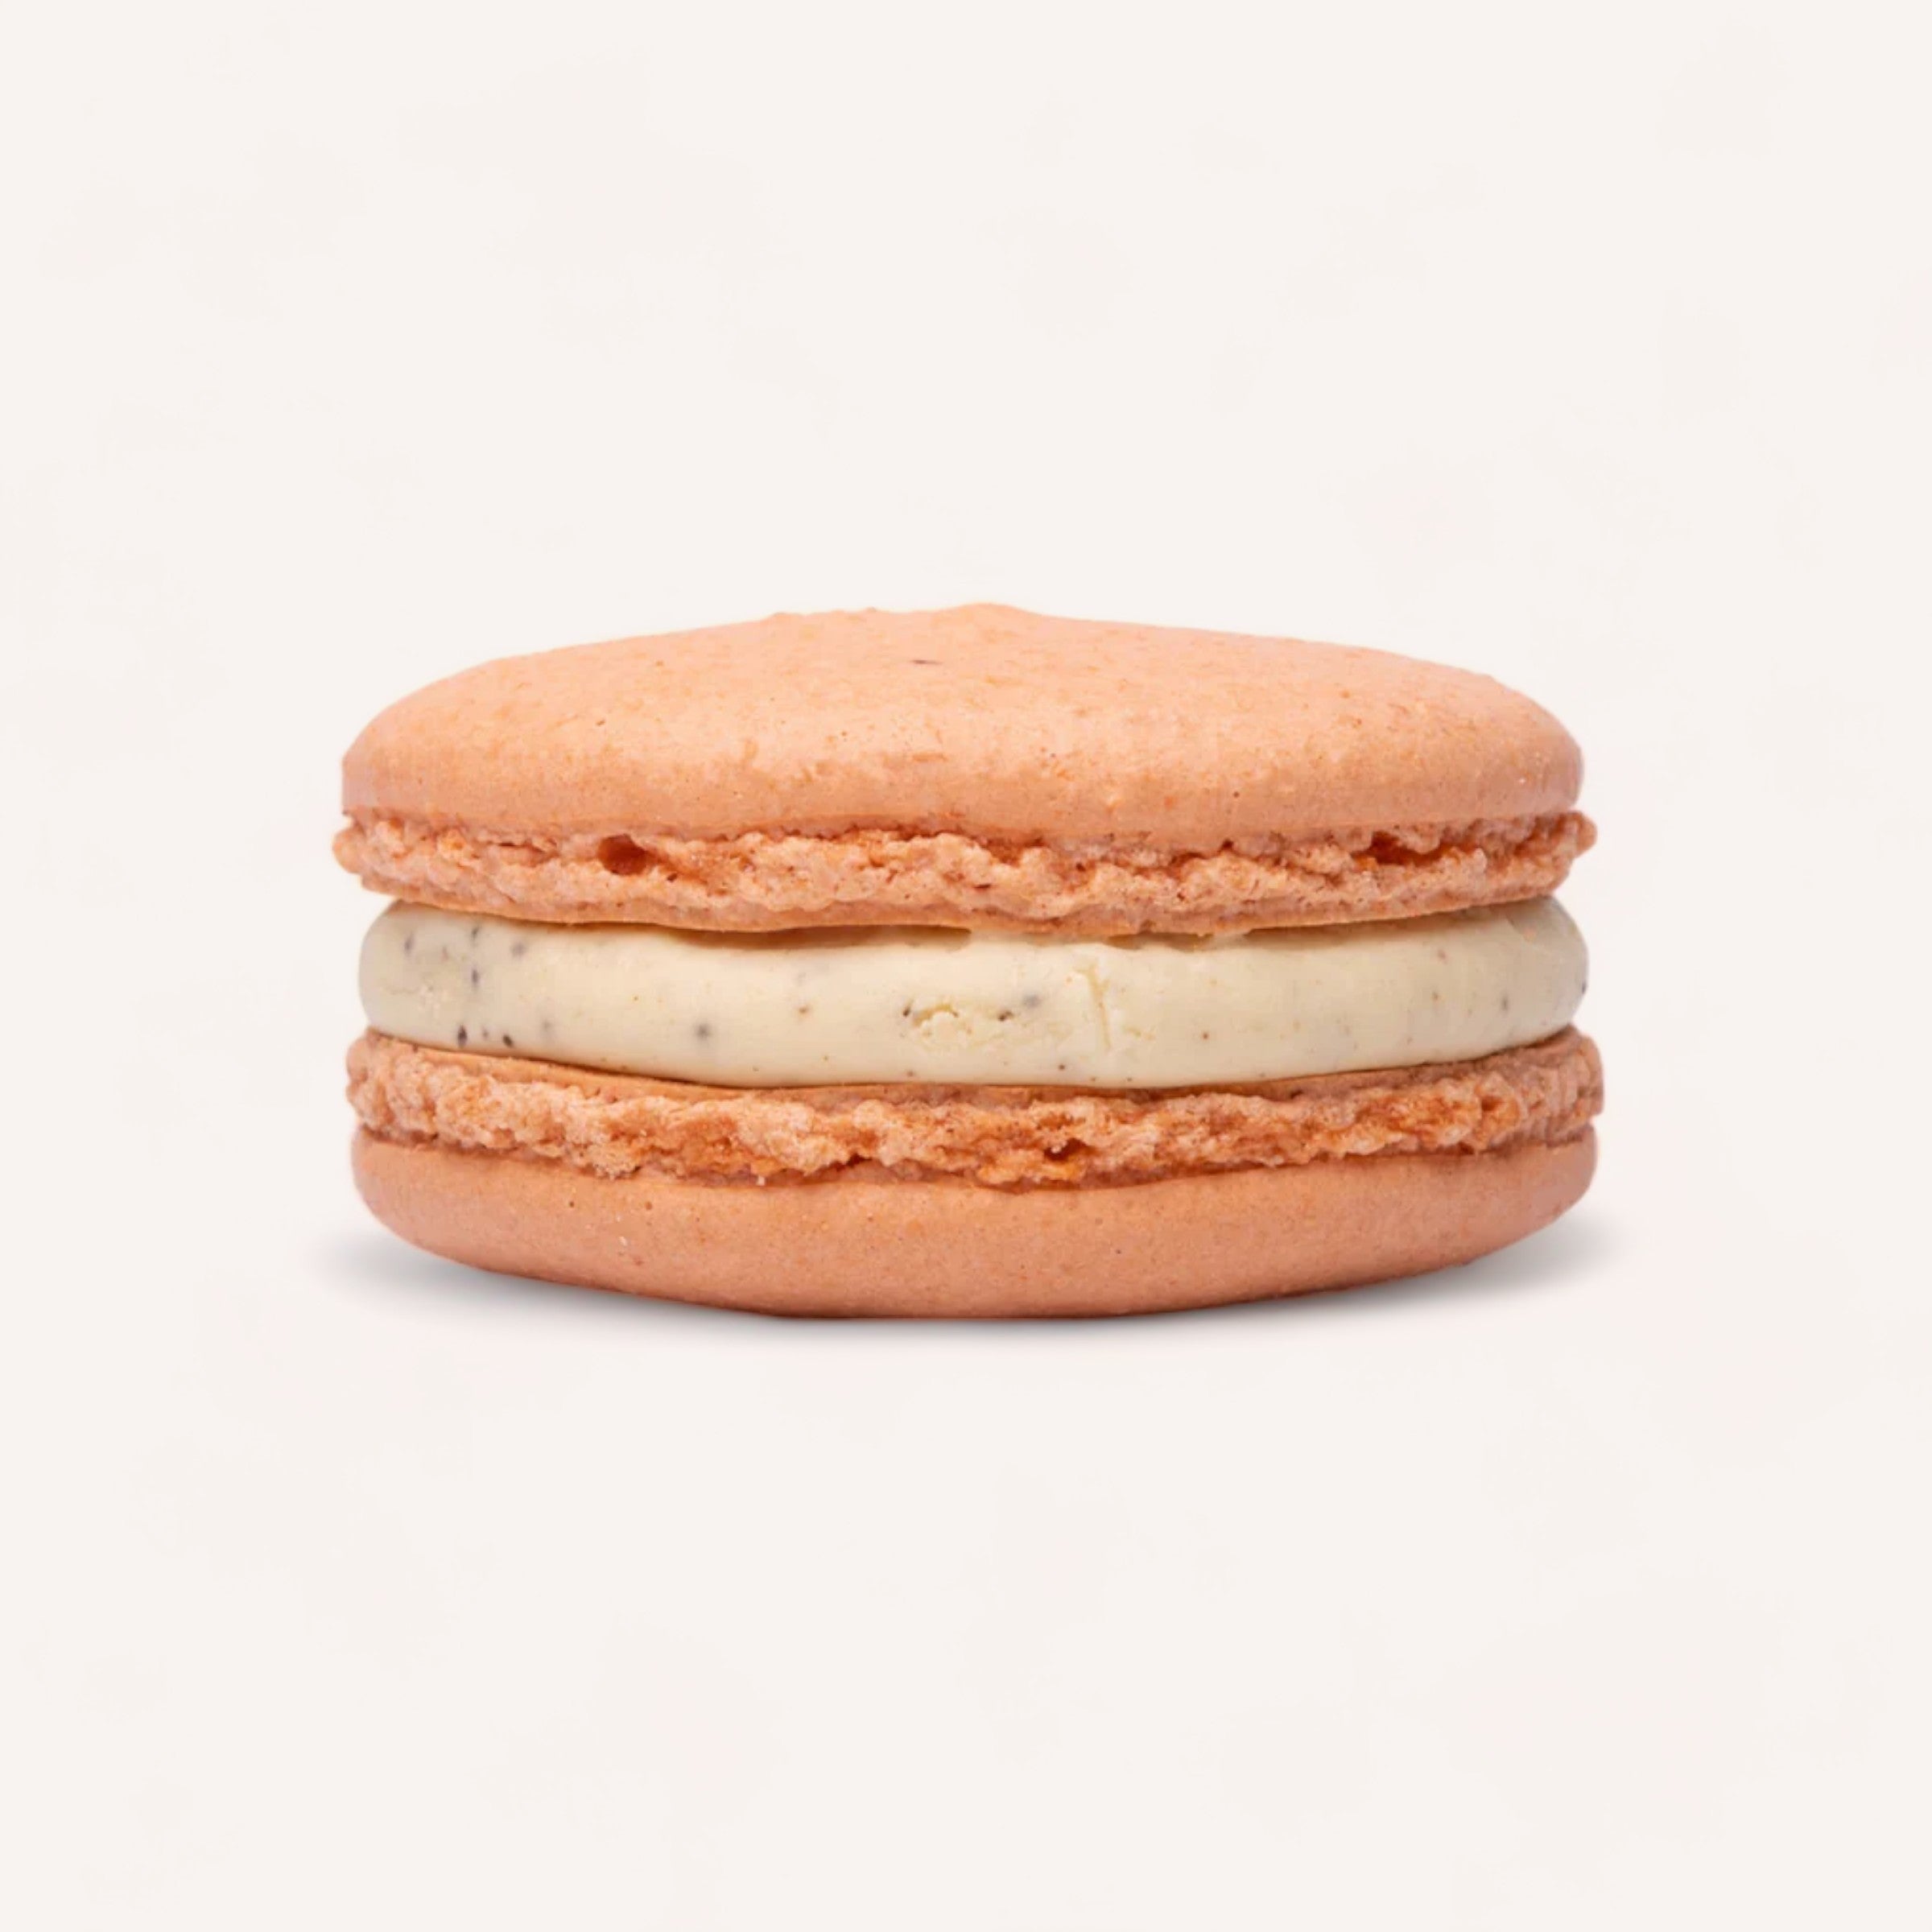 A single handmade macaron with a blush pink cookie shell and a creamy filling, presented against a white background in Christchurch, New Zealand from J'aime les Macarons' Box of 12 Macarons.